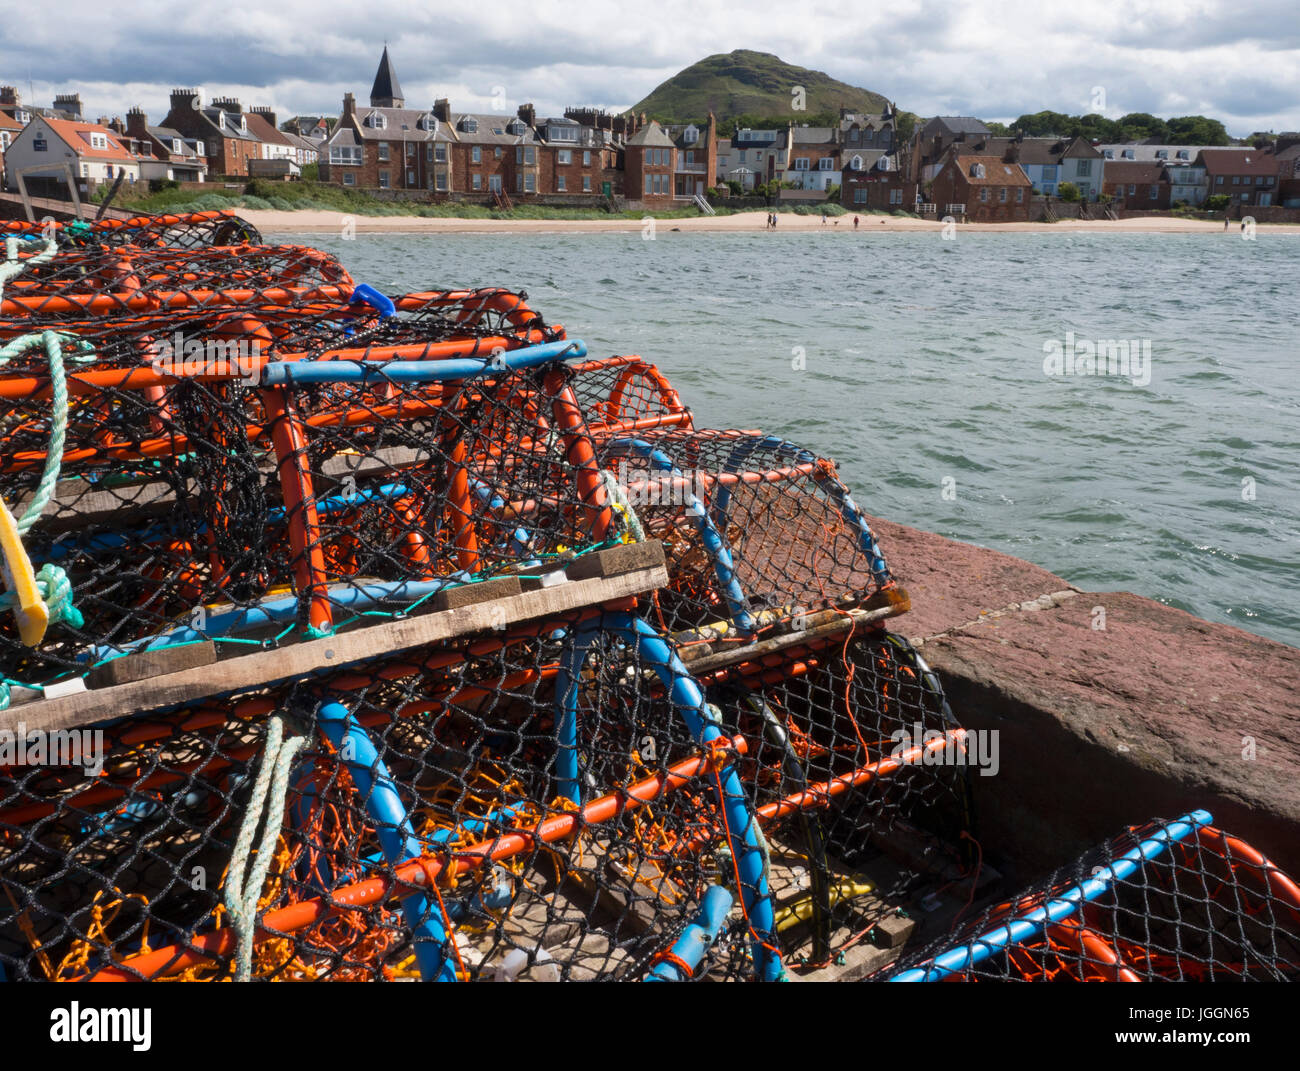 stack of crab and lobster pots (creels) on the harbour at North Berwick, East Lothian, Scotland Stock Photo